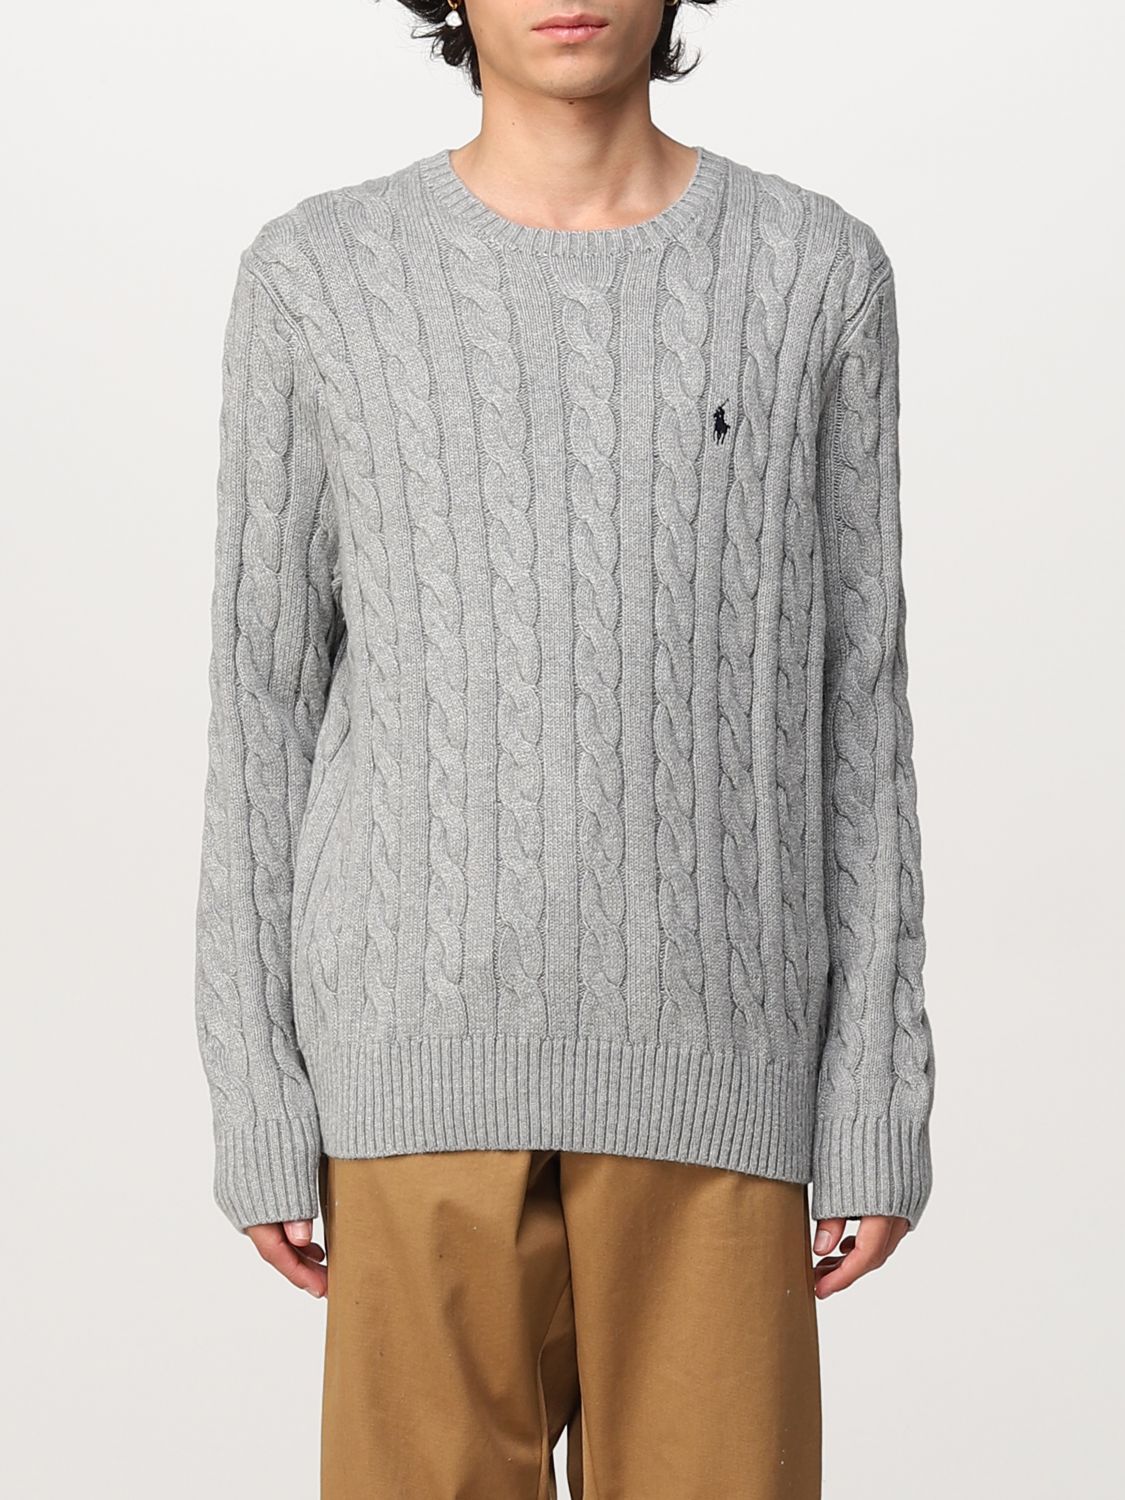 Polo Ralph Lauren Outlet: sweater for man - Grey | Polo Ralph Lauren sweater  710775885 online on 